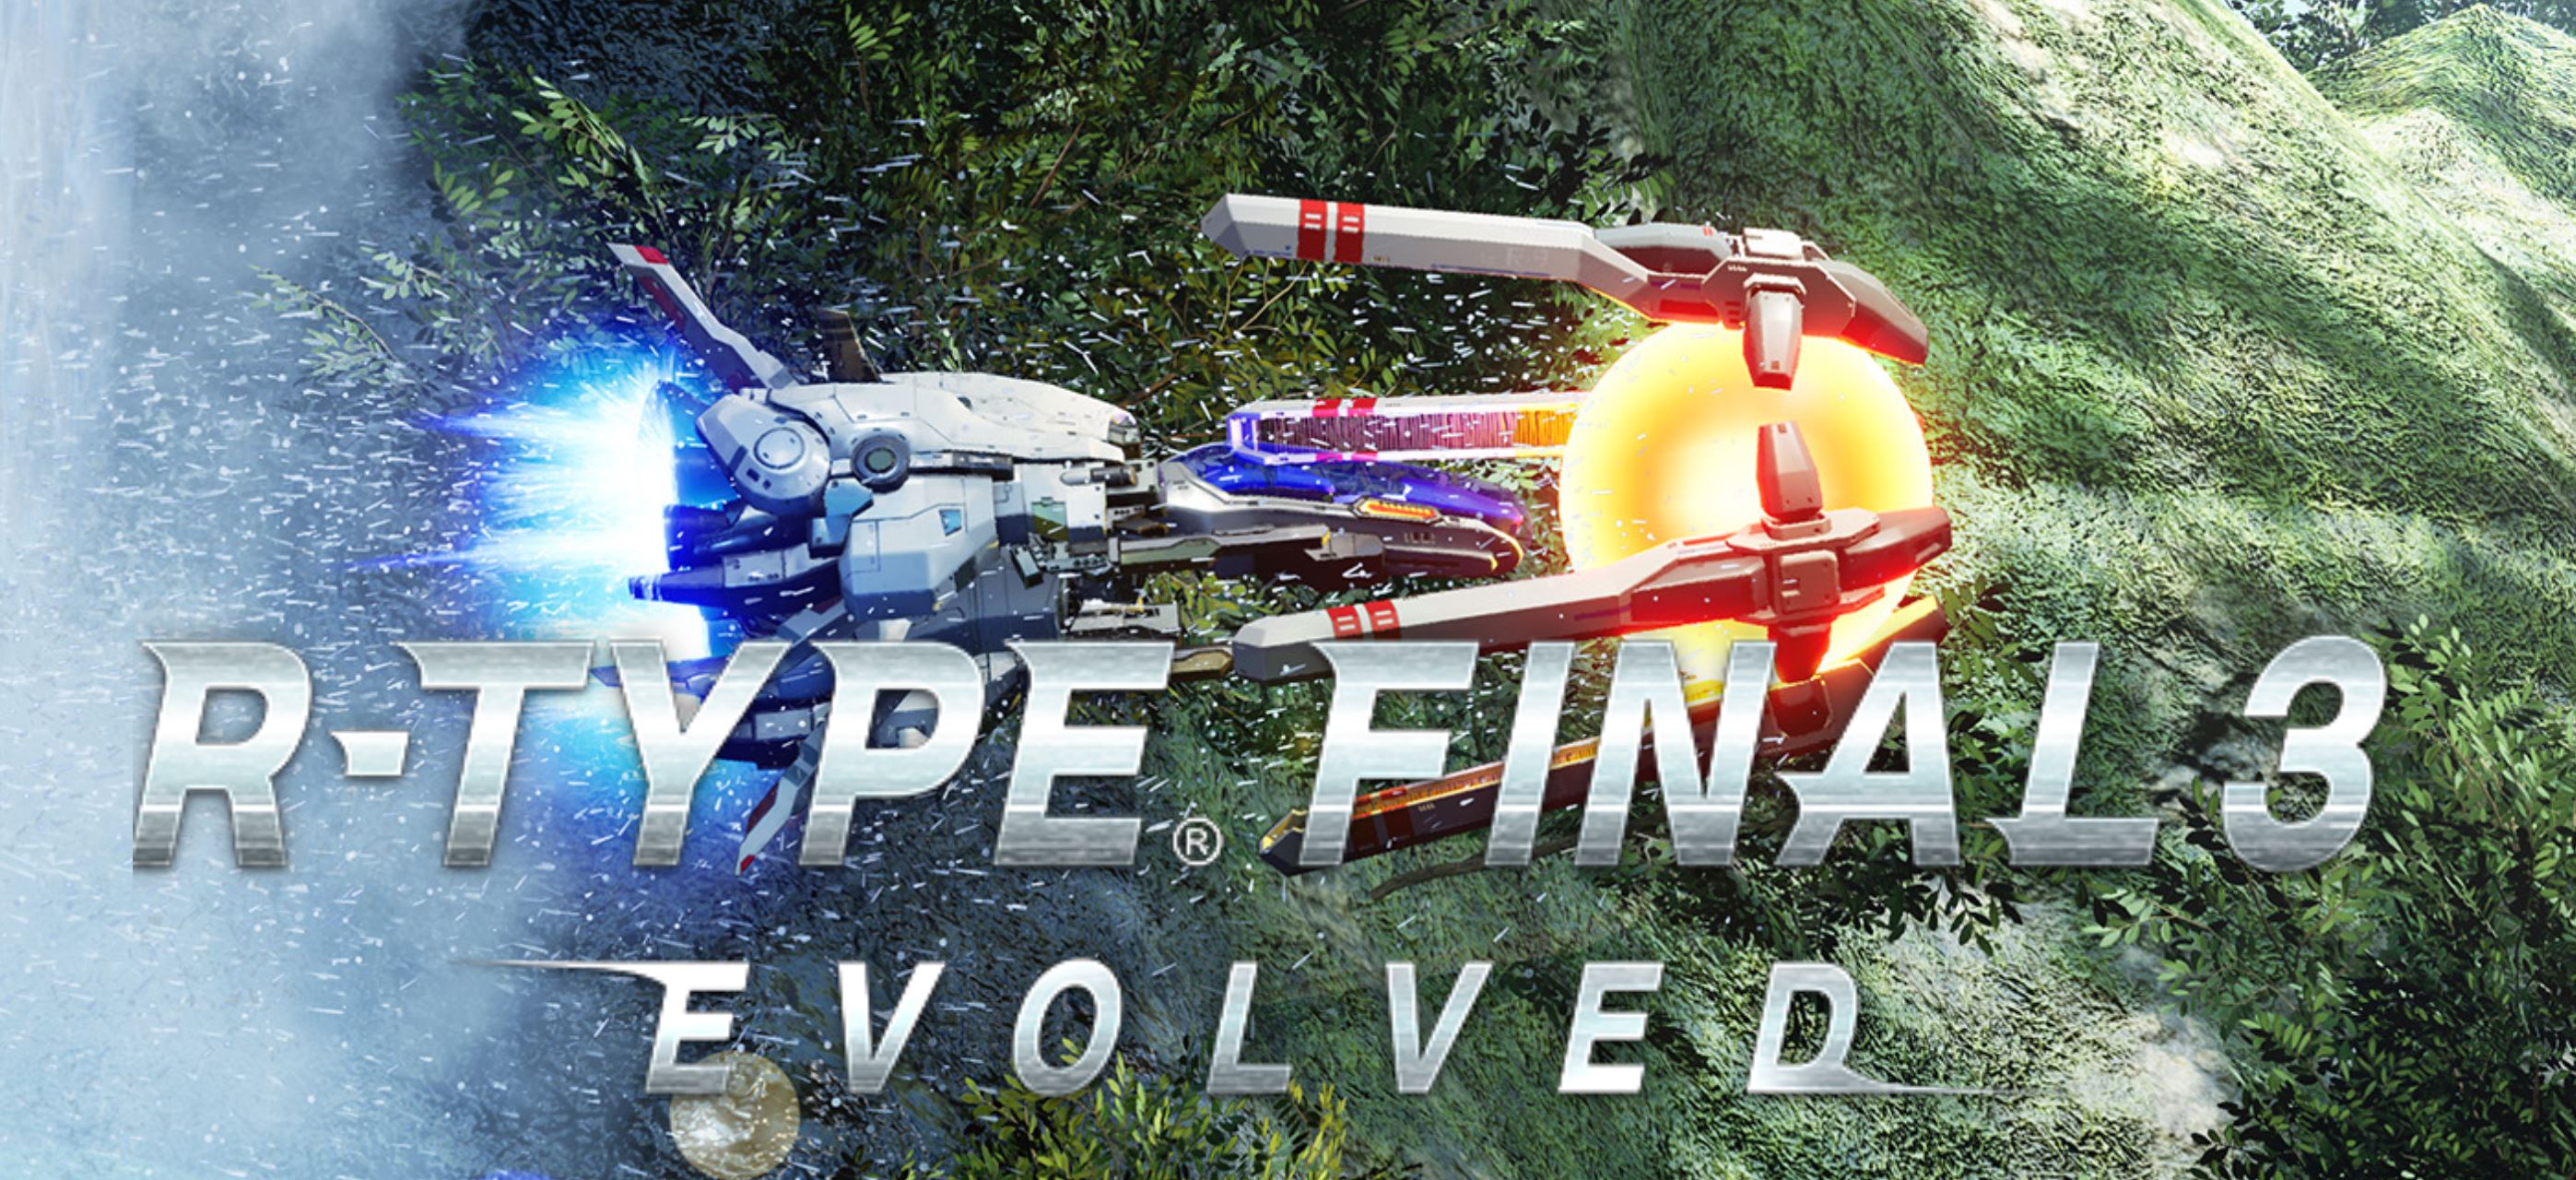 R-Type Final 3 Evolved Recensione